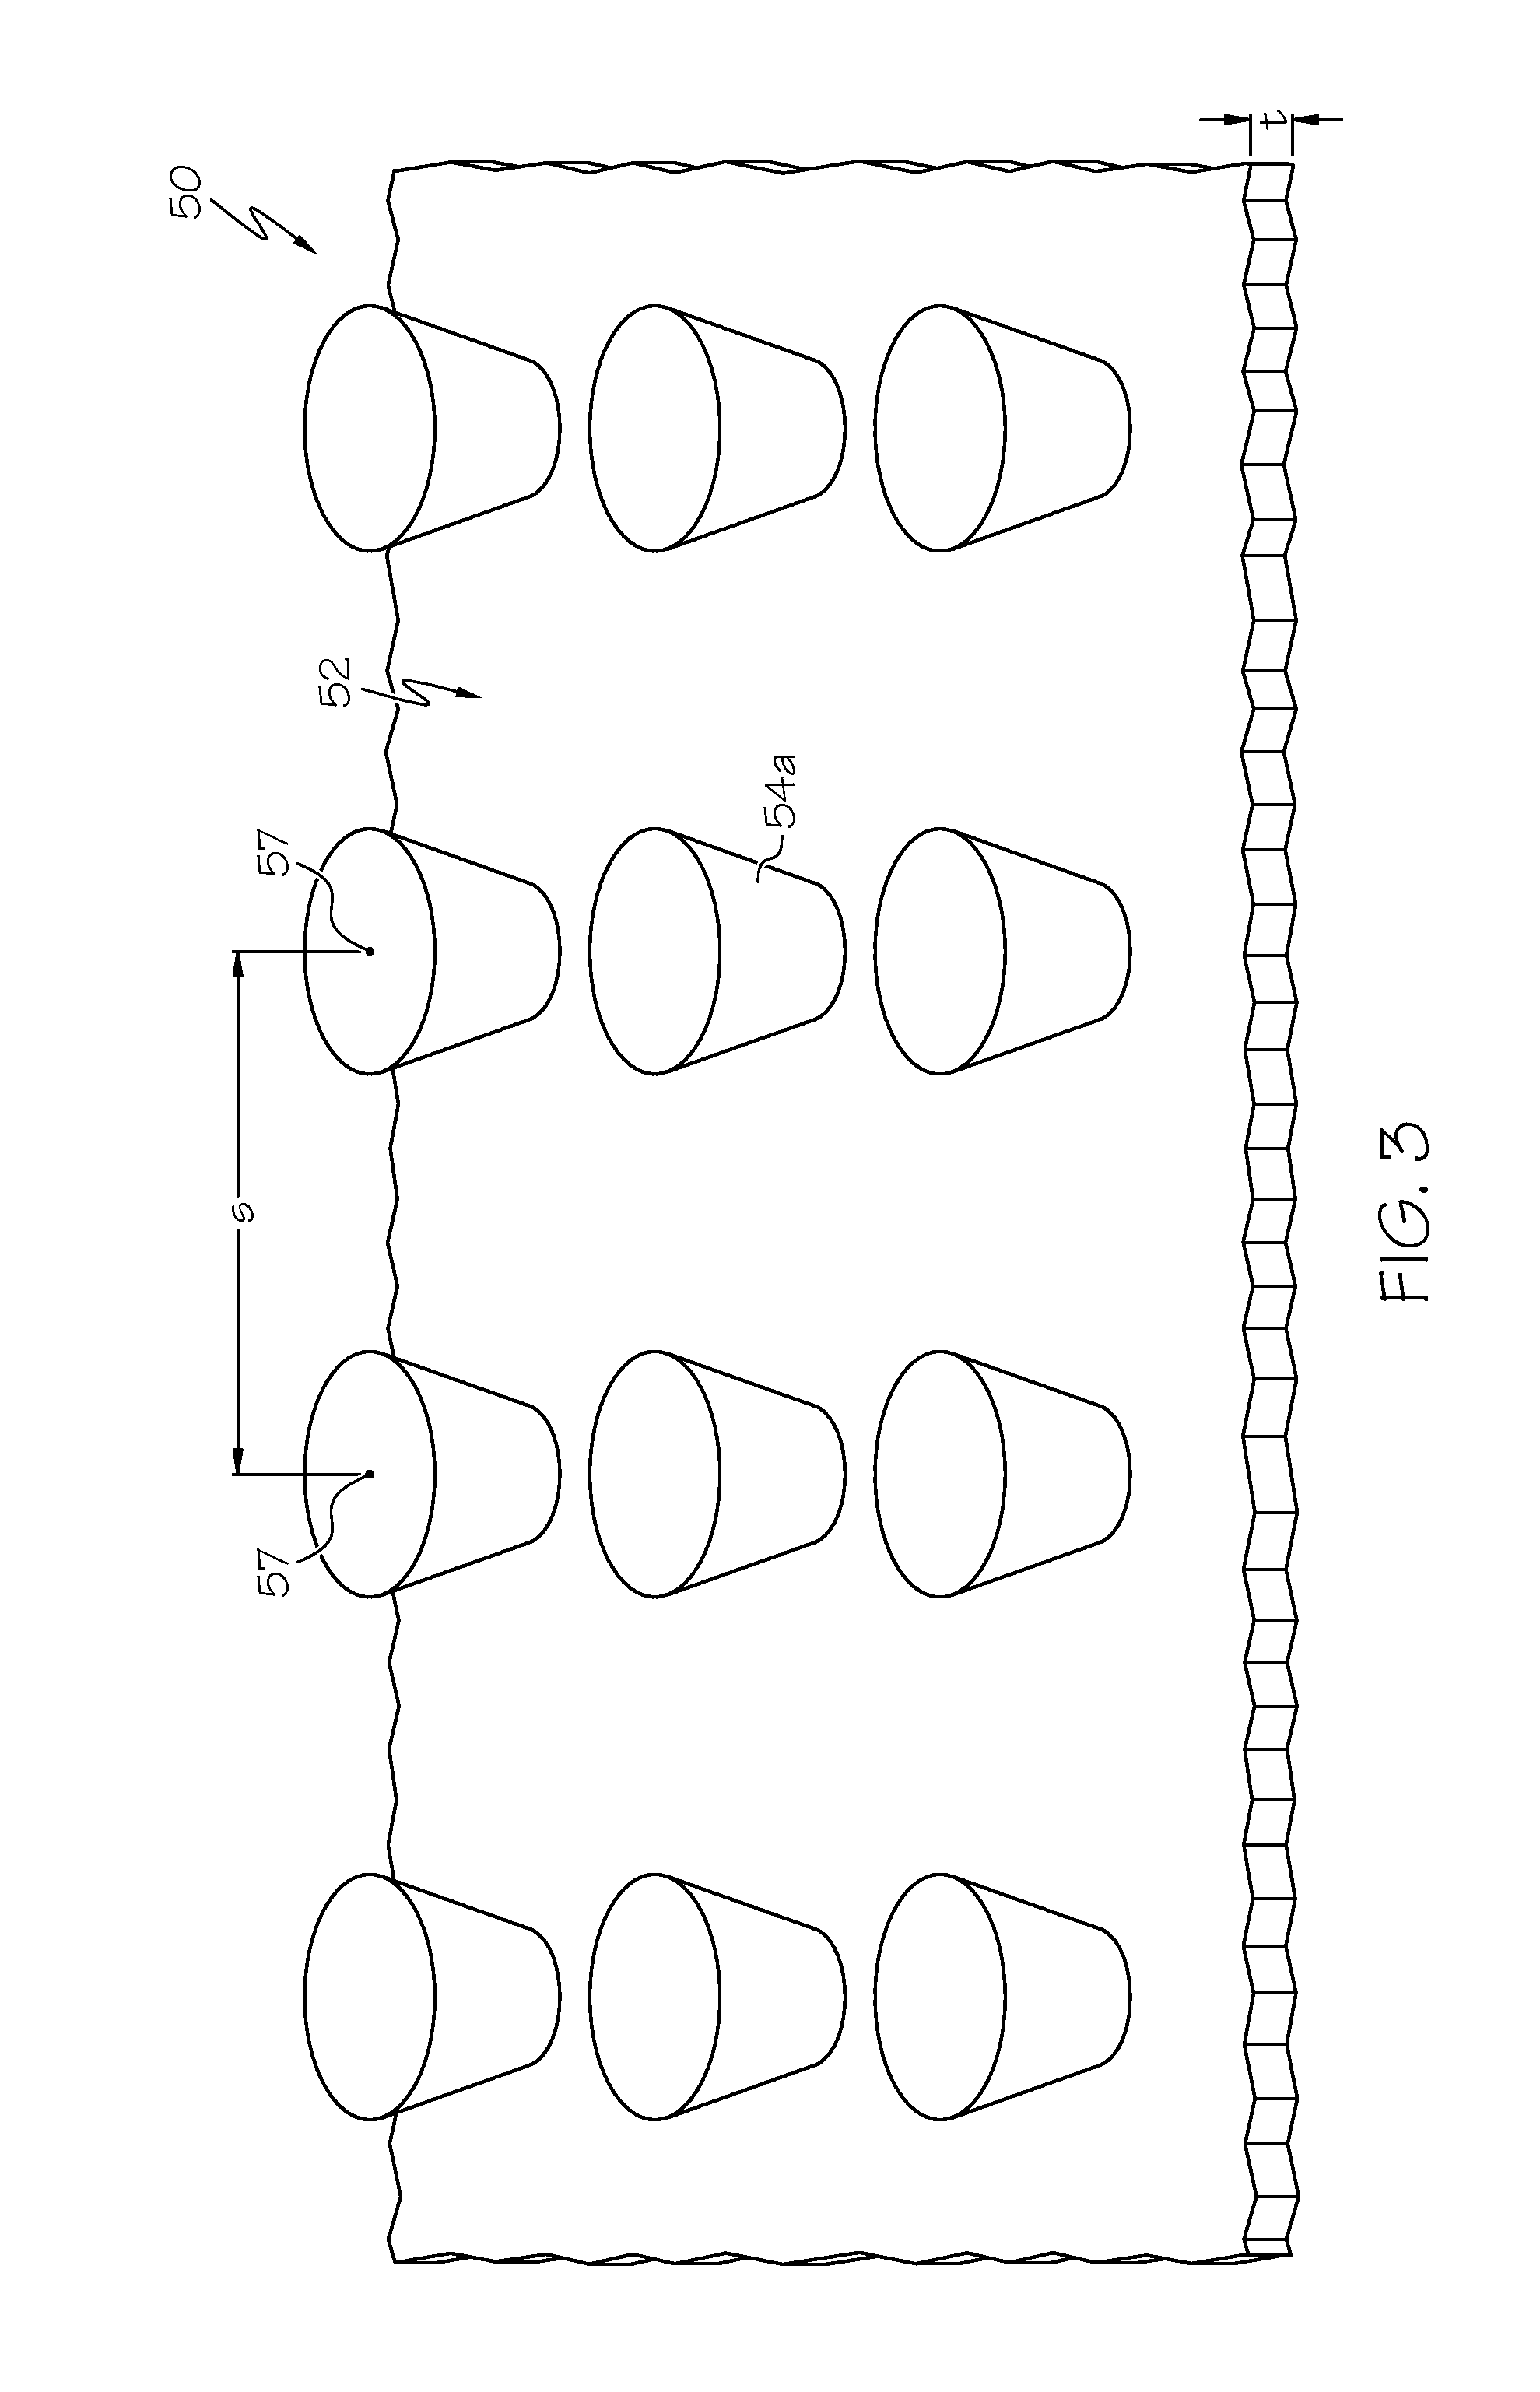 Covered Endoscopic Stents with Adhesion Elements